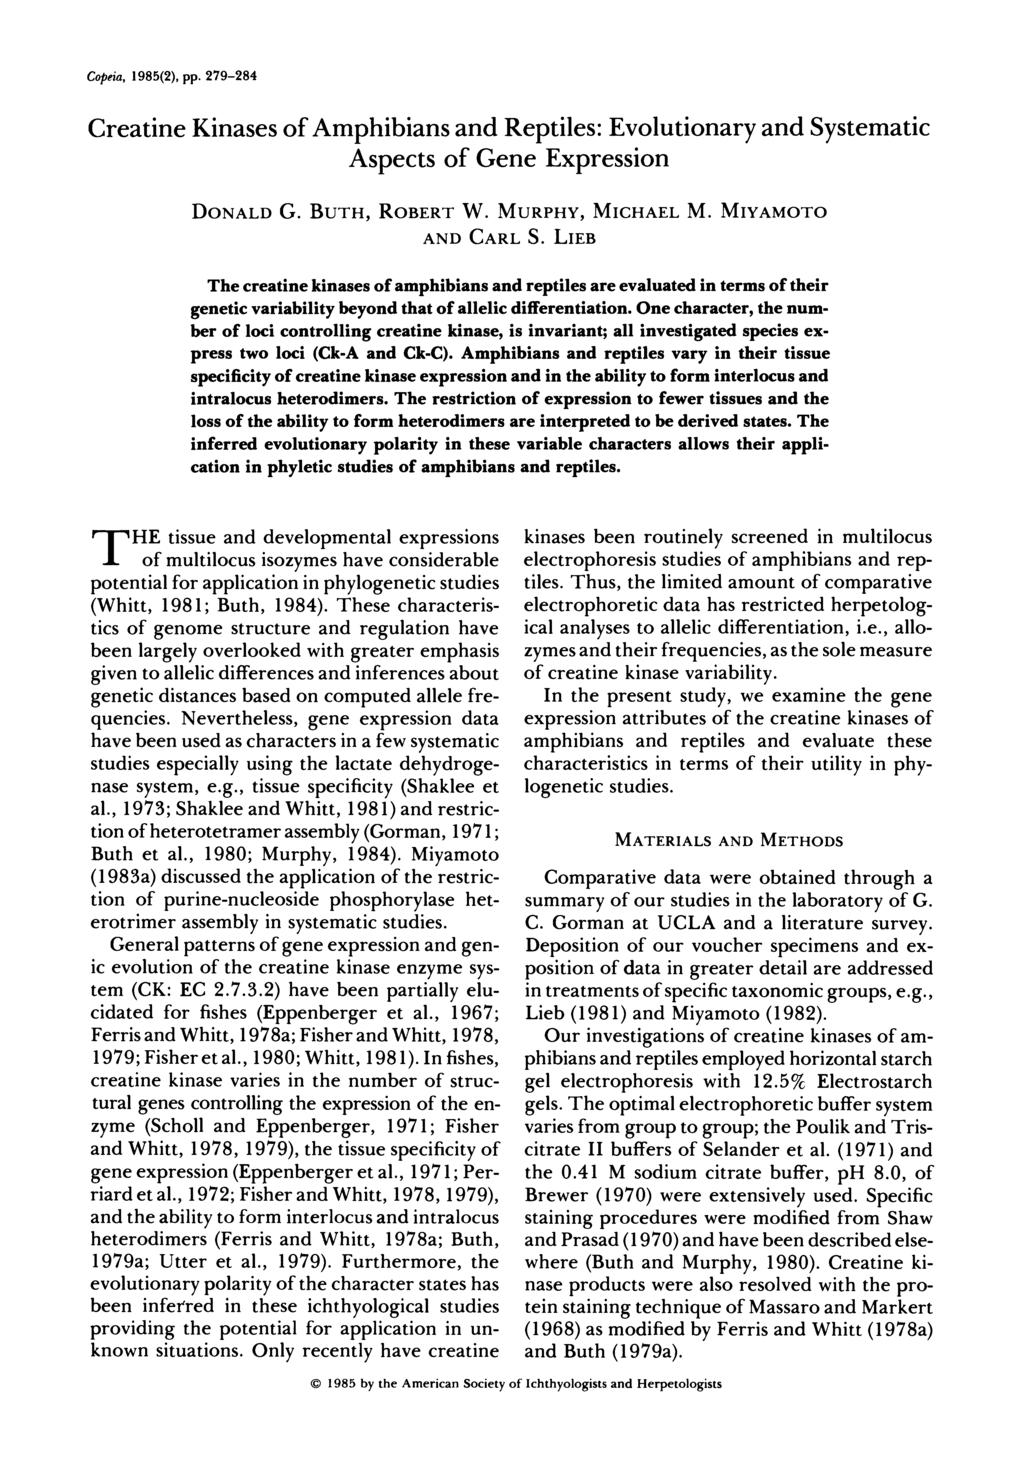 Copeia, 1985(2), pp. 279-284 Creatine Kinases of Amphibians and Reptiles: Evolutionary and Systematic Aspects of Gene Expression DONALD G. BUTH, ROBERT W. MURPHY, MICHAEL M. MIYAMOTO AND CARL S.